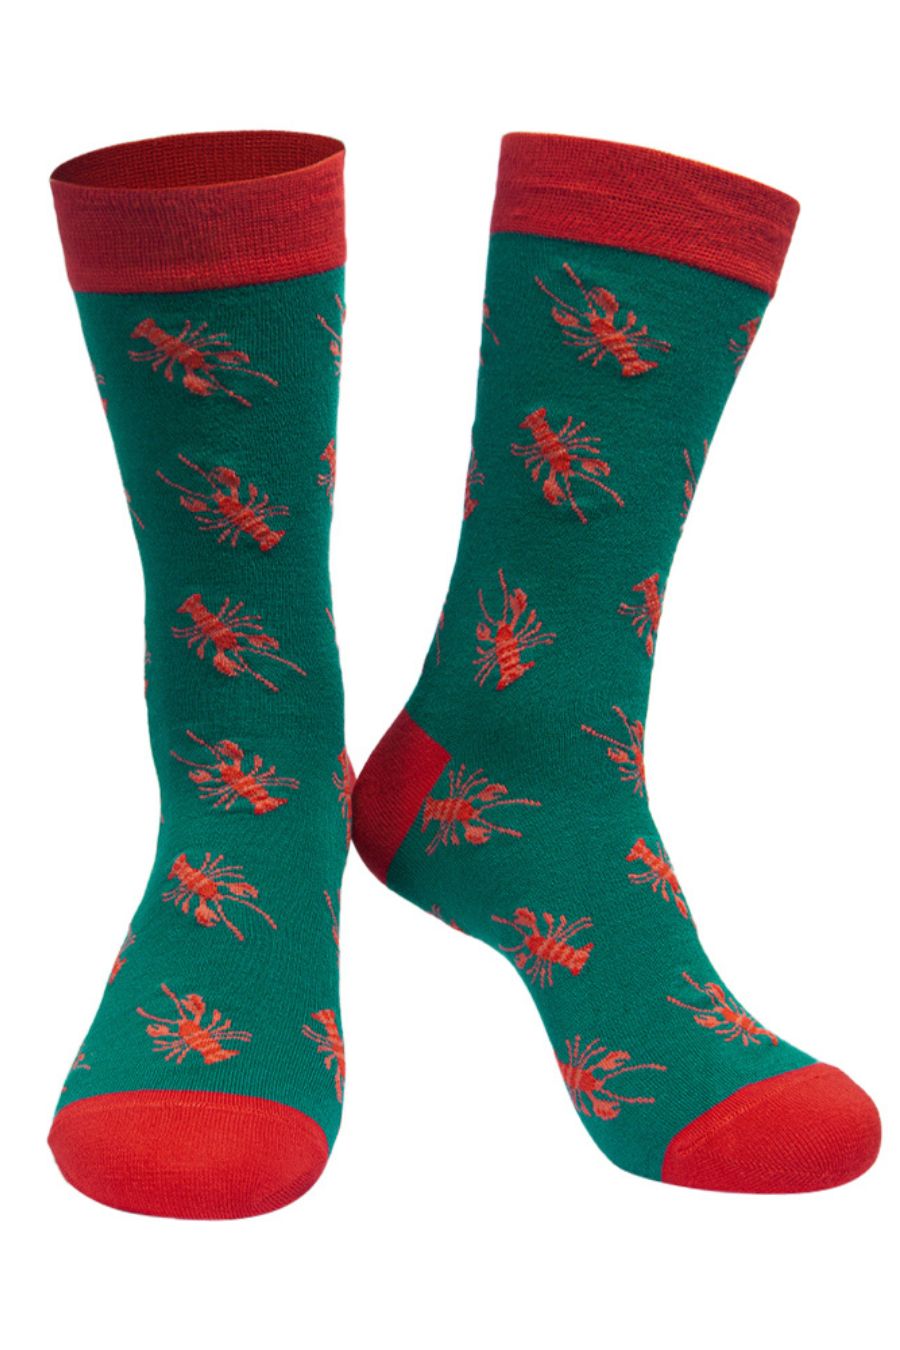 green bamboo dress socks with an all over red lobster print